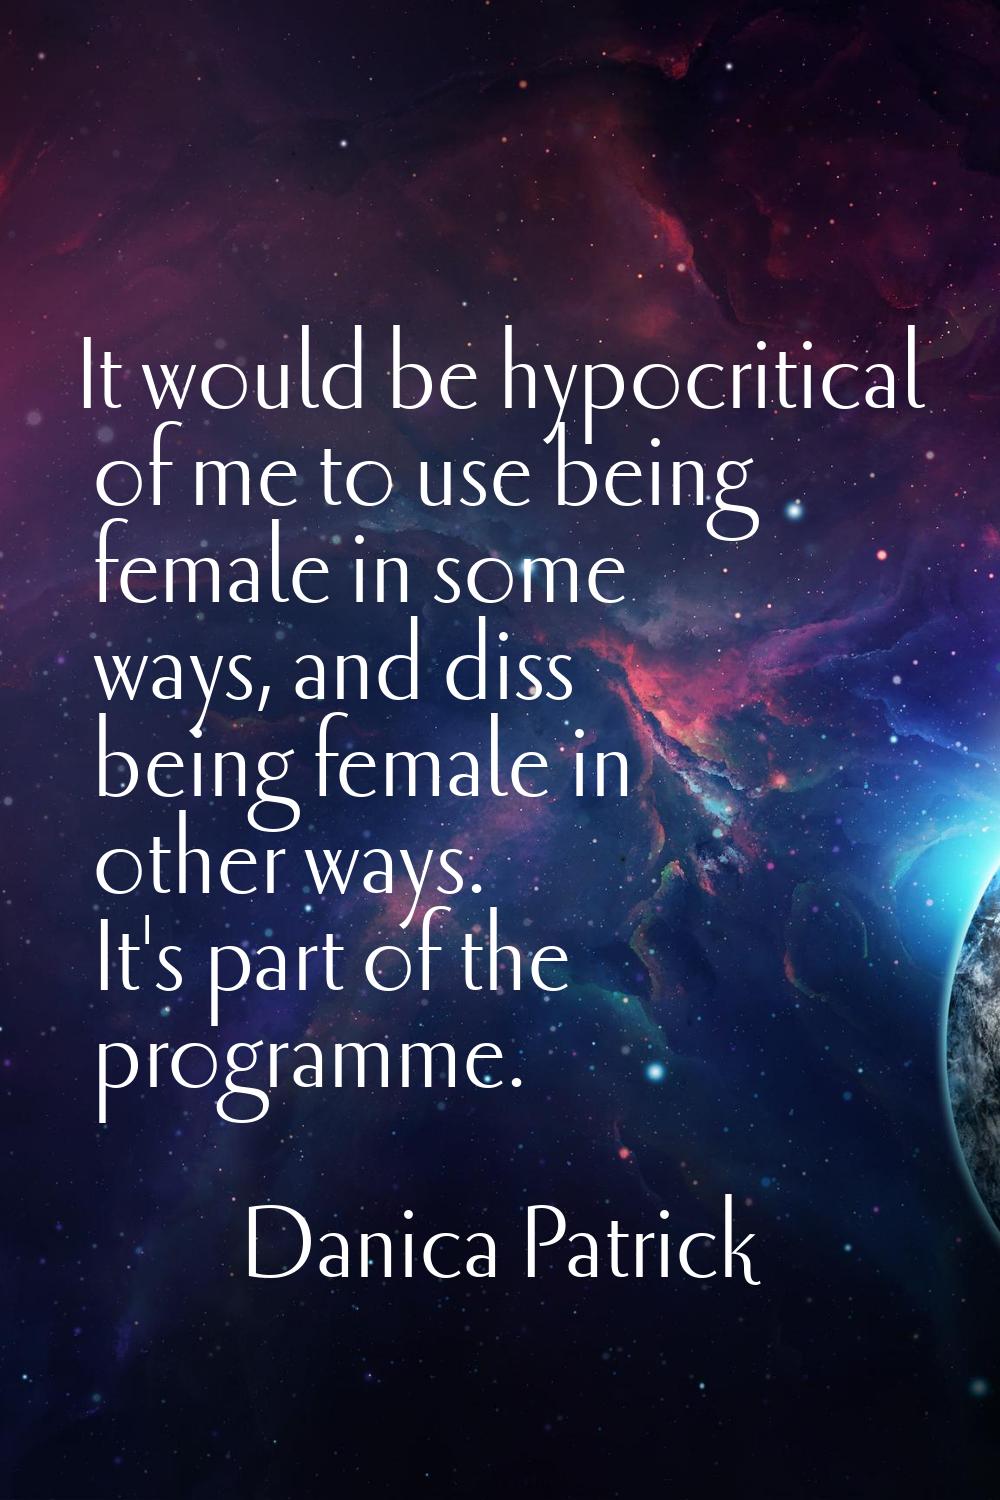 It would be hypocritical of me to use being female in some ways, and diss being female in other way